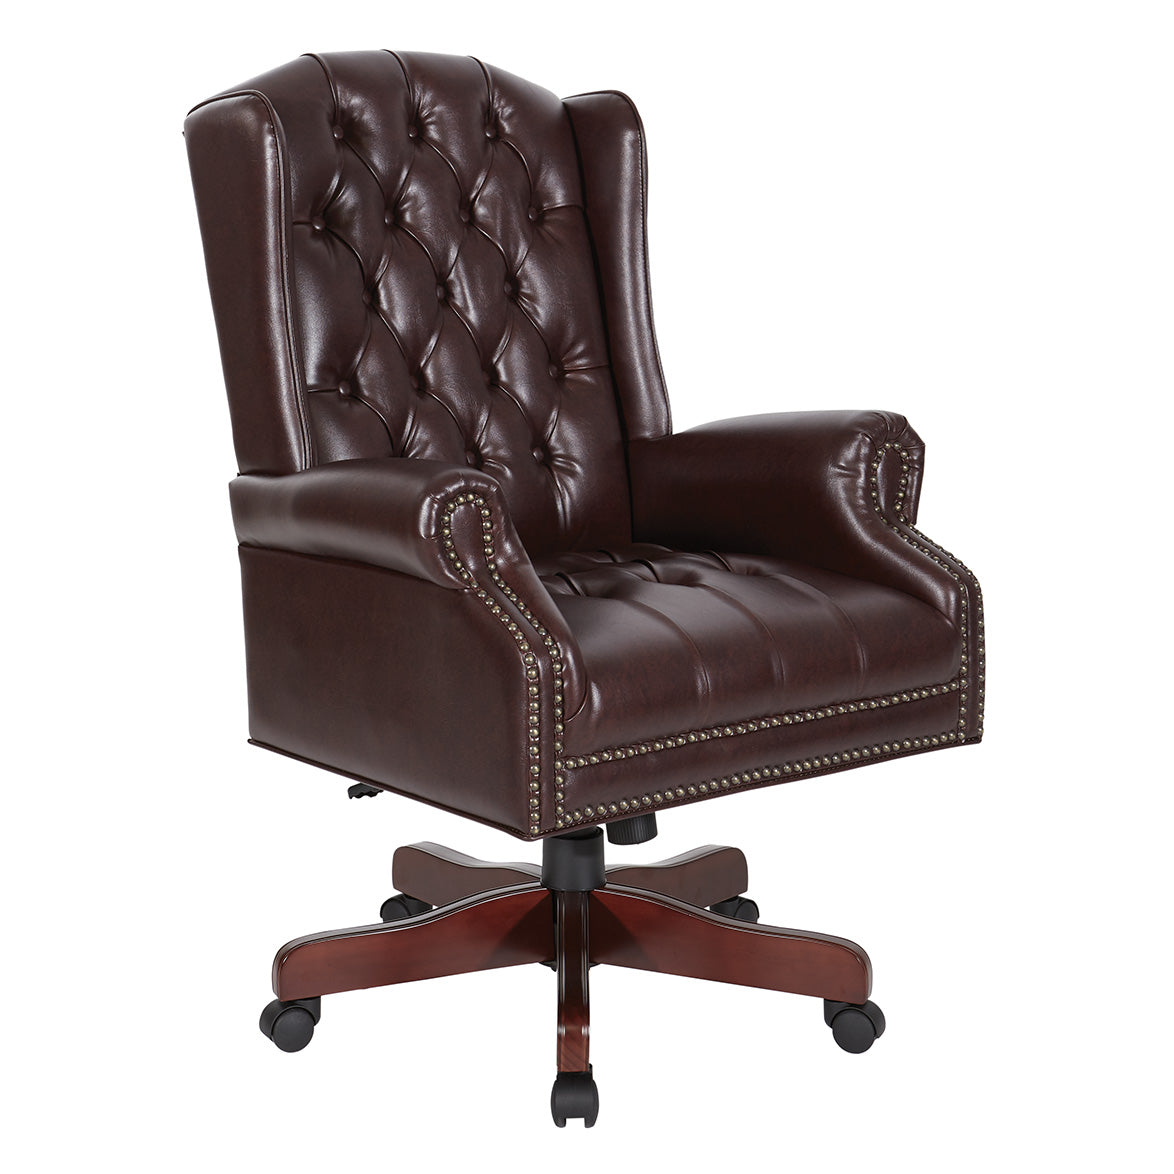 TEX220 - Deluxe High Back Traditional Executive Chair  by Office Star